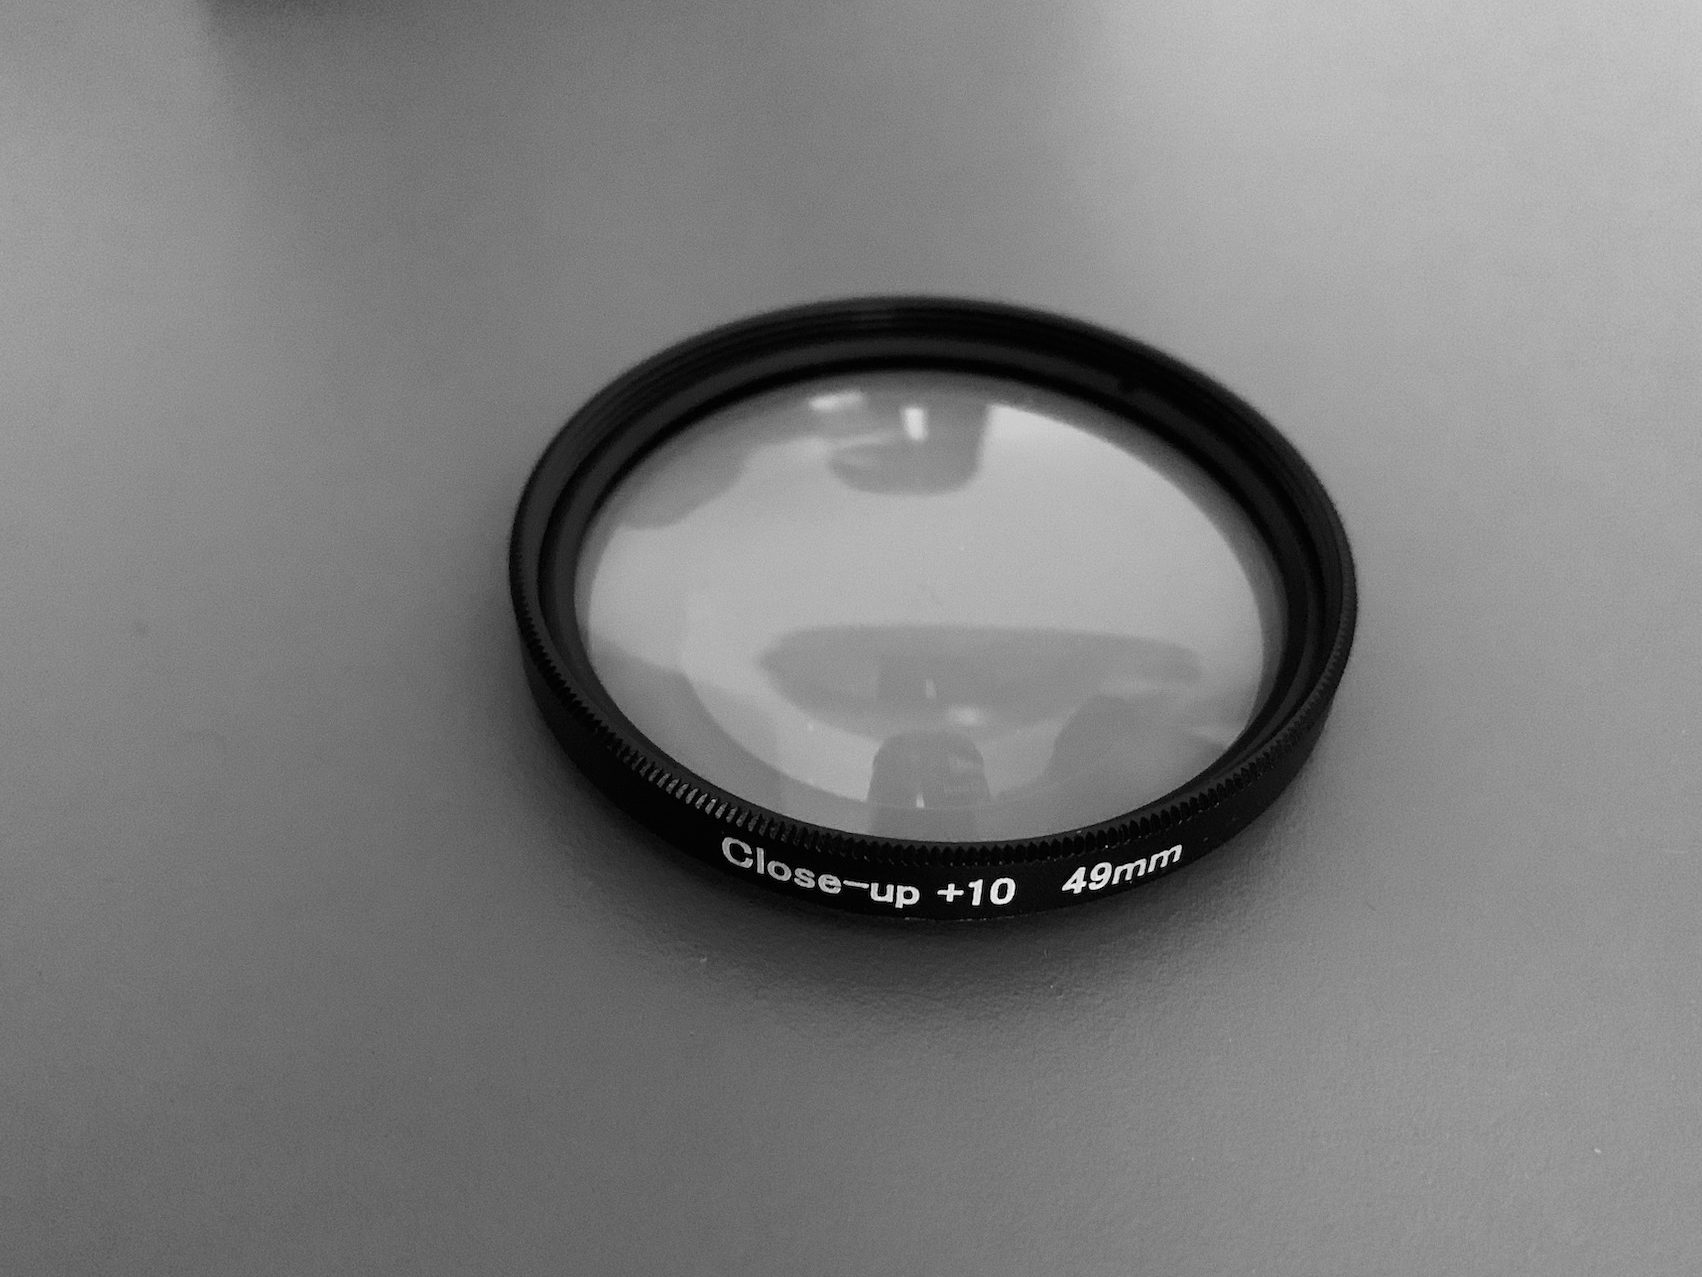 Smardy 49mm Close-Up +10 diopter filter.